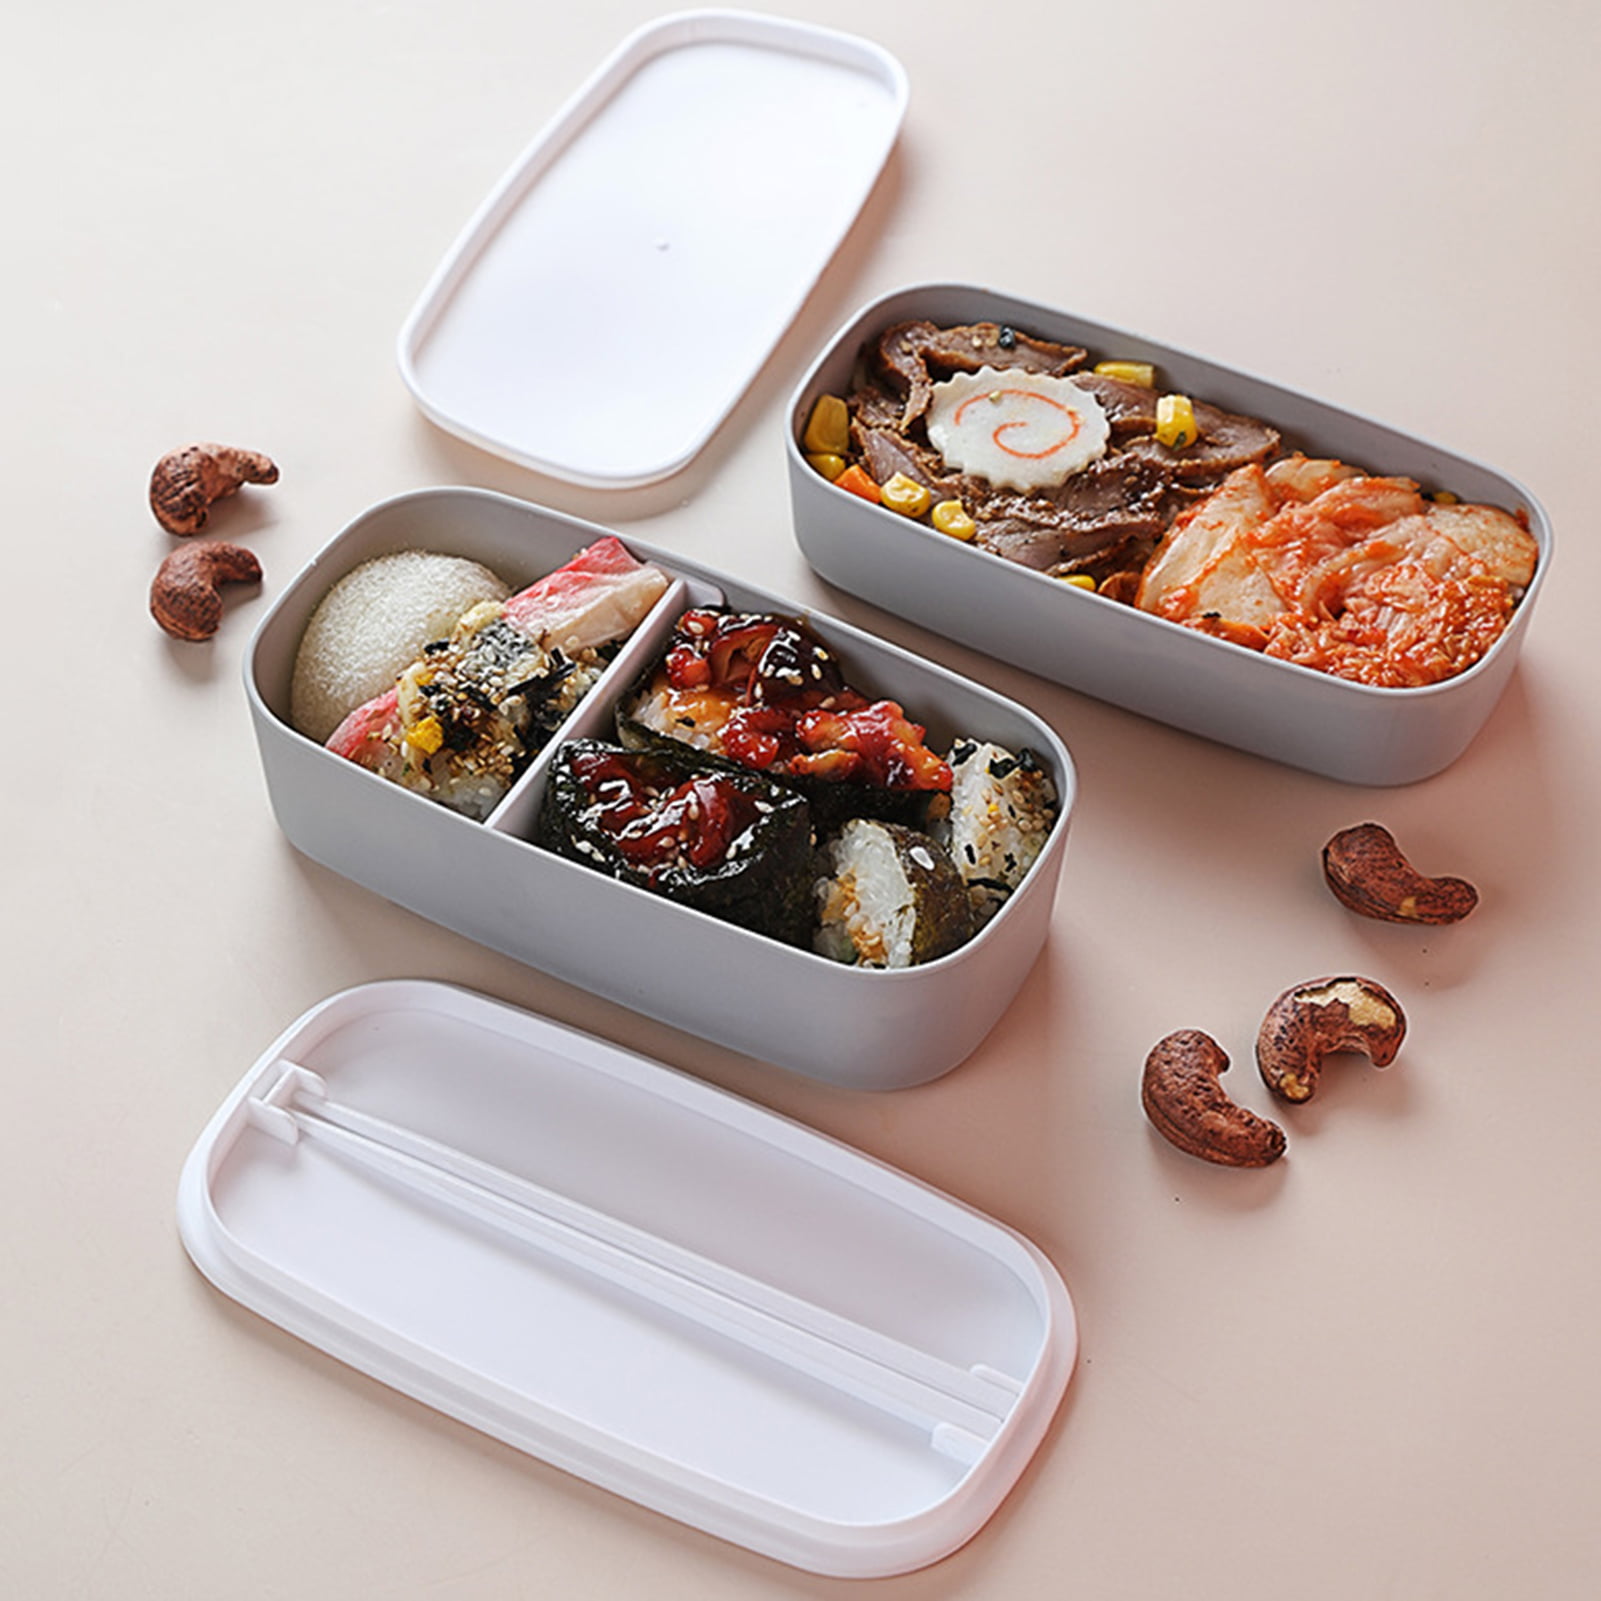 Yirtree Bento Box Adult Lunch Box with Spoon, 1/2/3-Tier Stainless Steel  Stackable Thermal Food Container for On-the-Go Meal and Snack Packing 